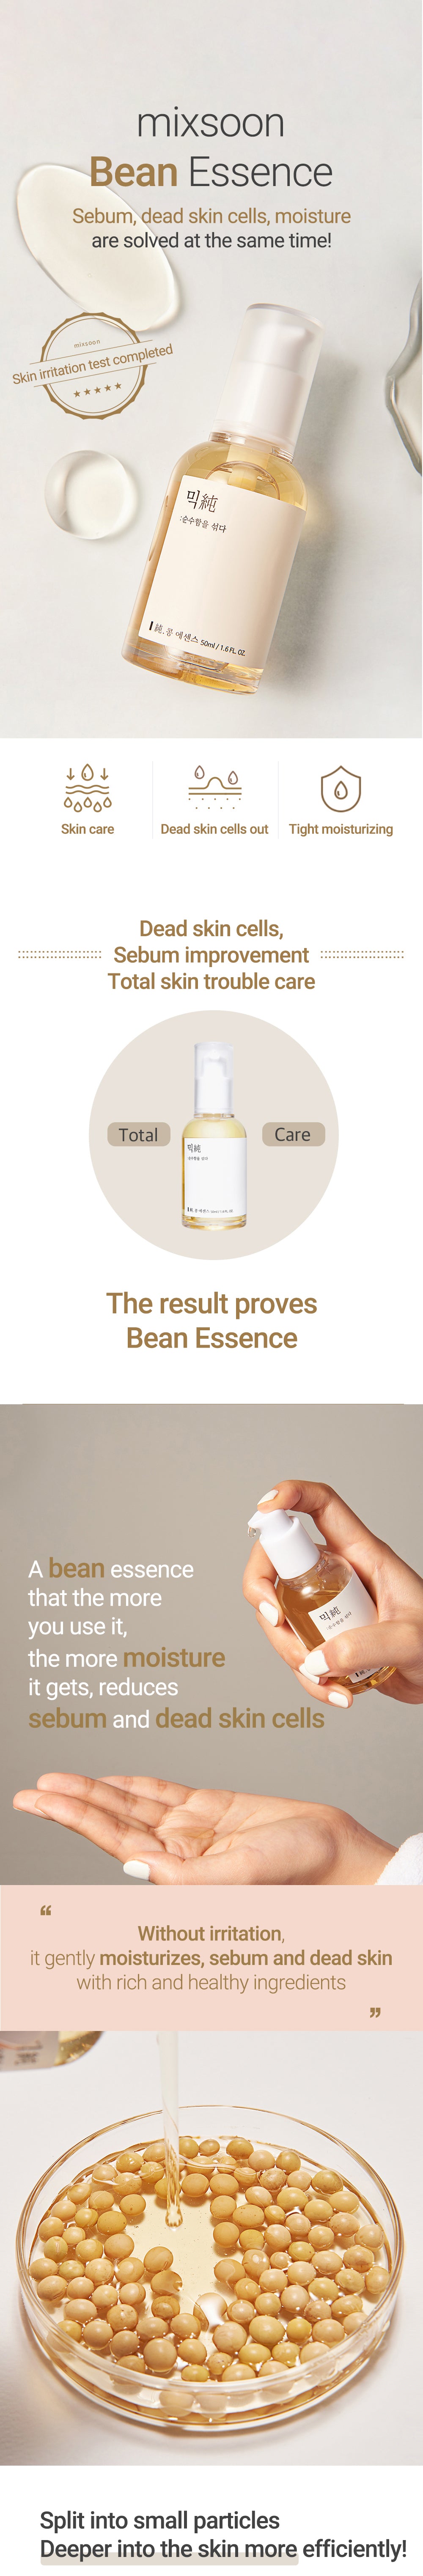 Mixsoon Bean Essence Glam Touch UK